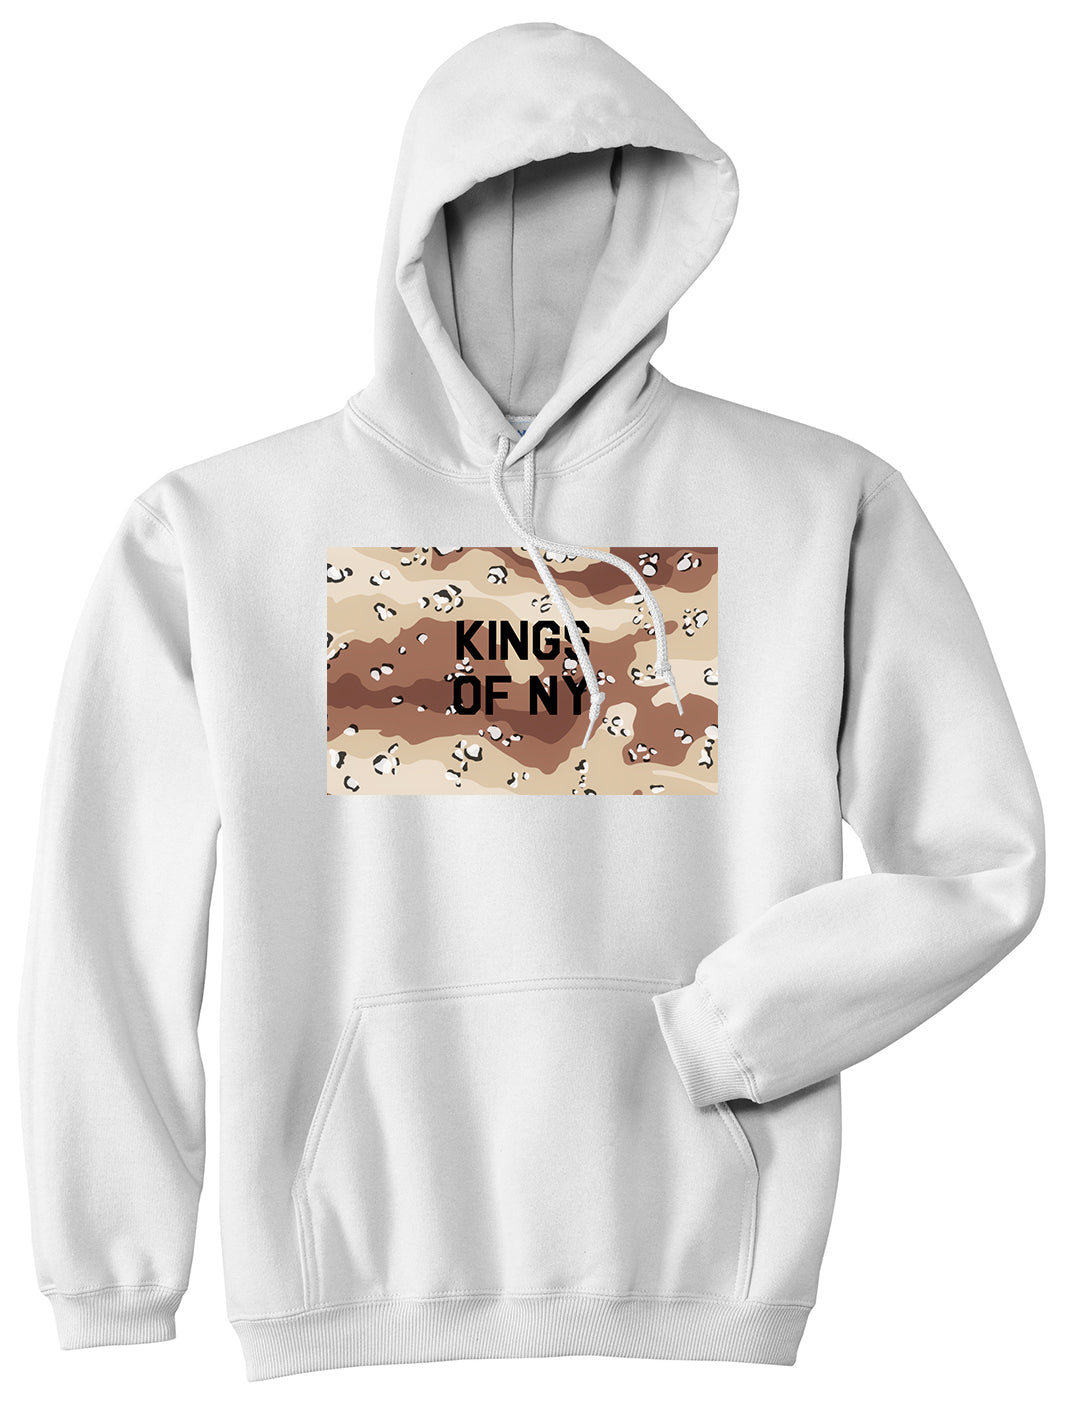 Desert Camo Army Pullover Hoodie in White